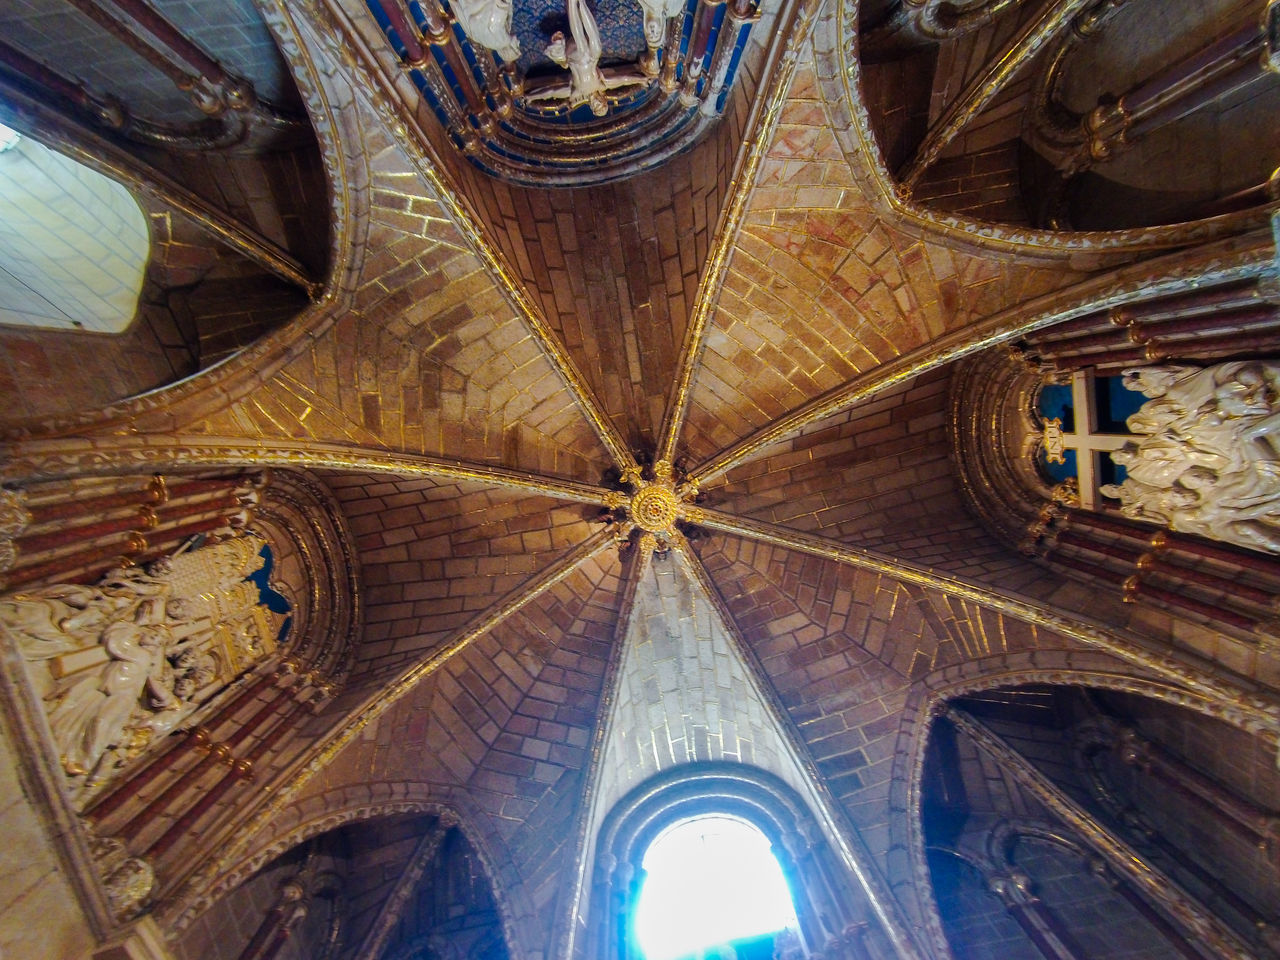 architecture, built structure, place of worship, ceiling, low angle view, religion, indoors, no people, belief, building, spirituality, dome, travel destinations, vault, catholicism, arch, worship, the past, history, pattern, day, ancient history, travel, architectural feature, directly below, art